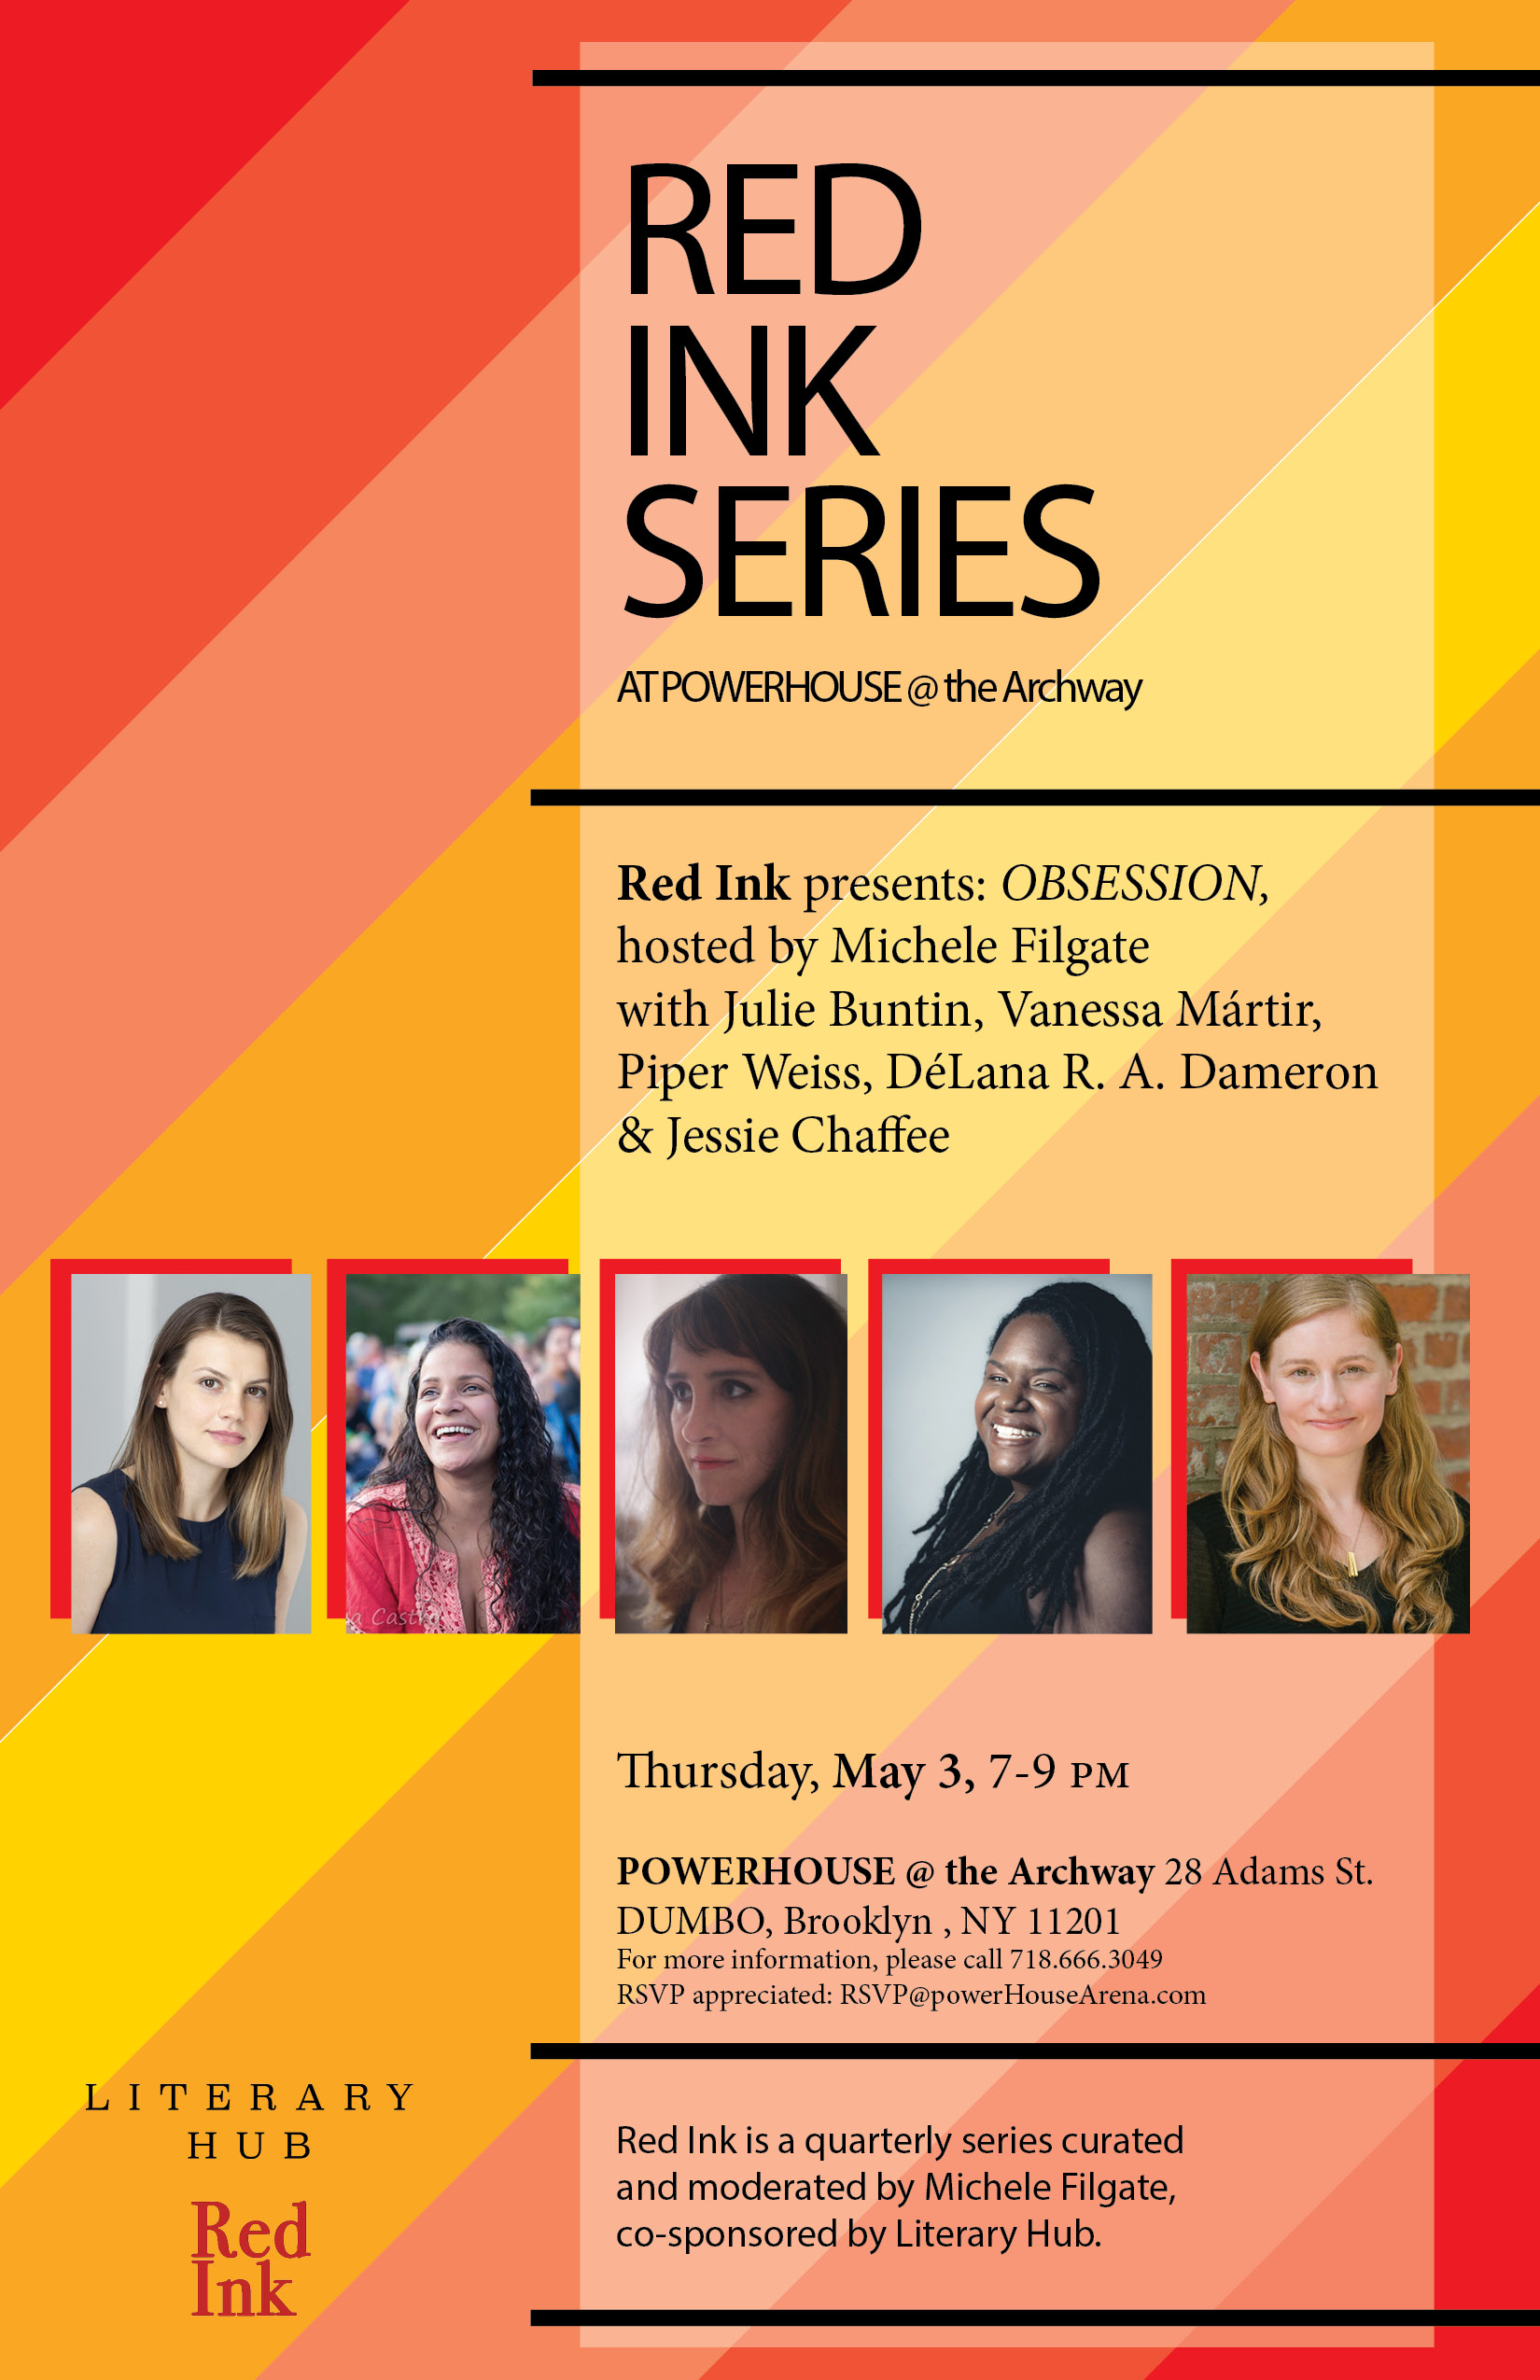 Red Ink Series: OBSESSION, hosted by Michele Filgate with Julie Buntin, Vanessa Mártir, Piper Weiss, DéLana R.A. Dameron & Jessie Chaffee